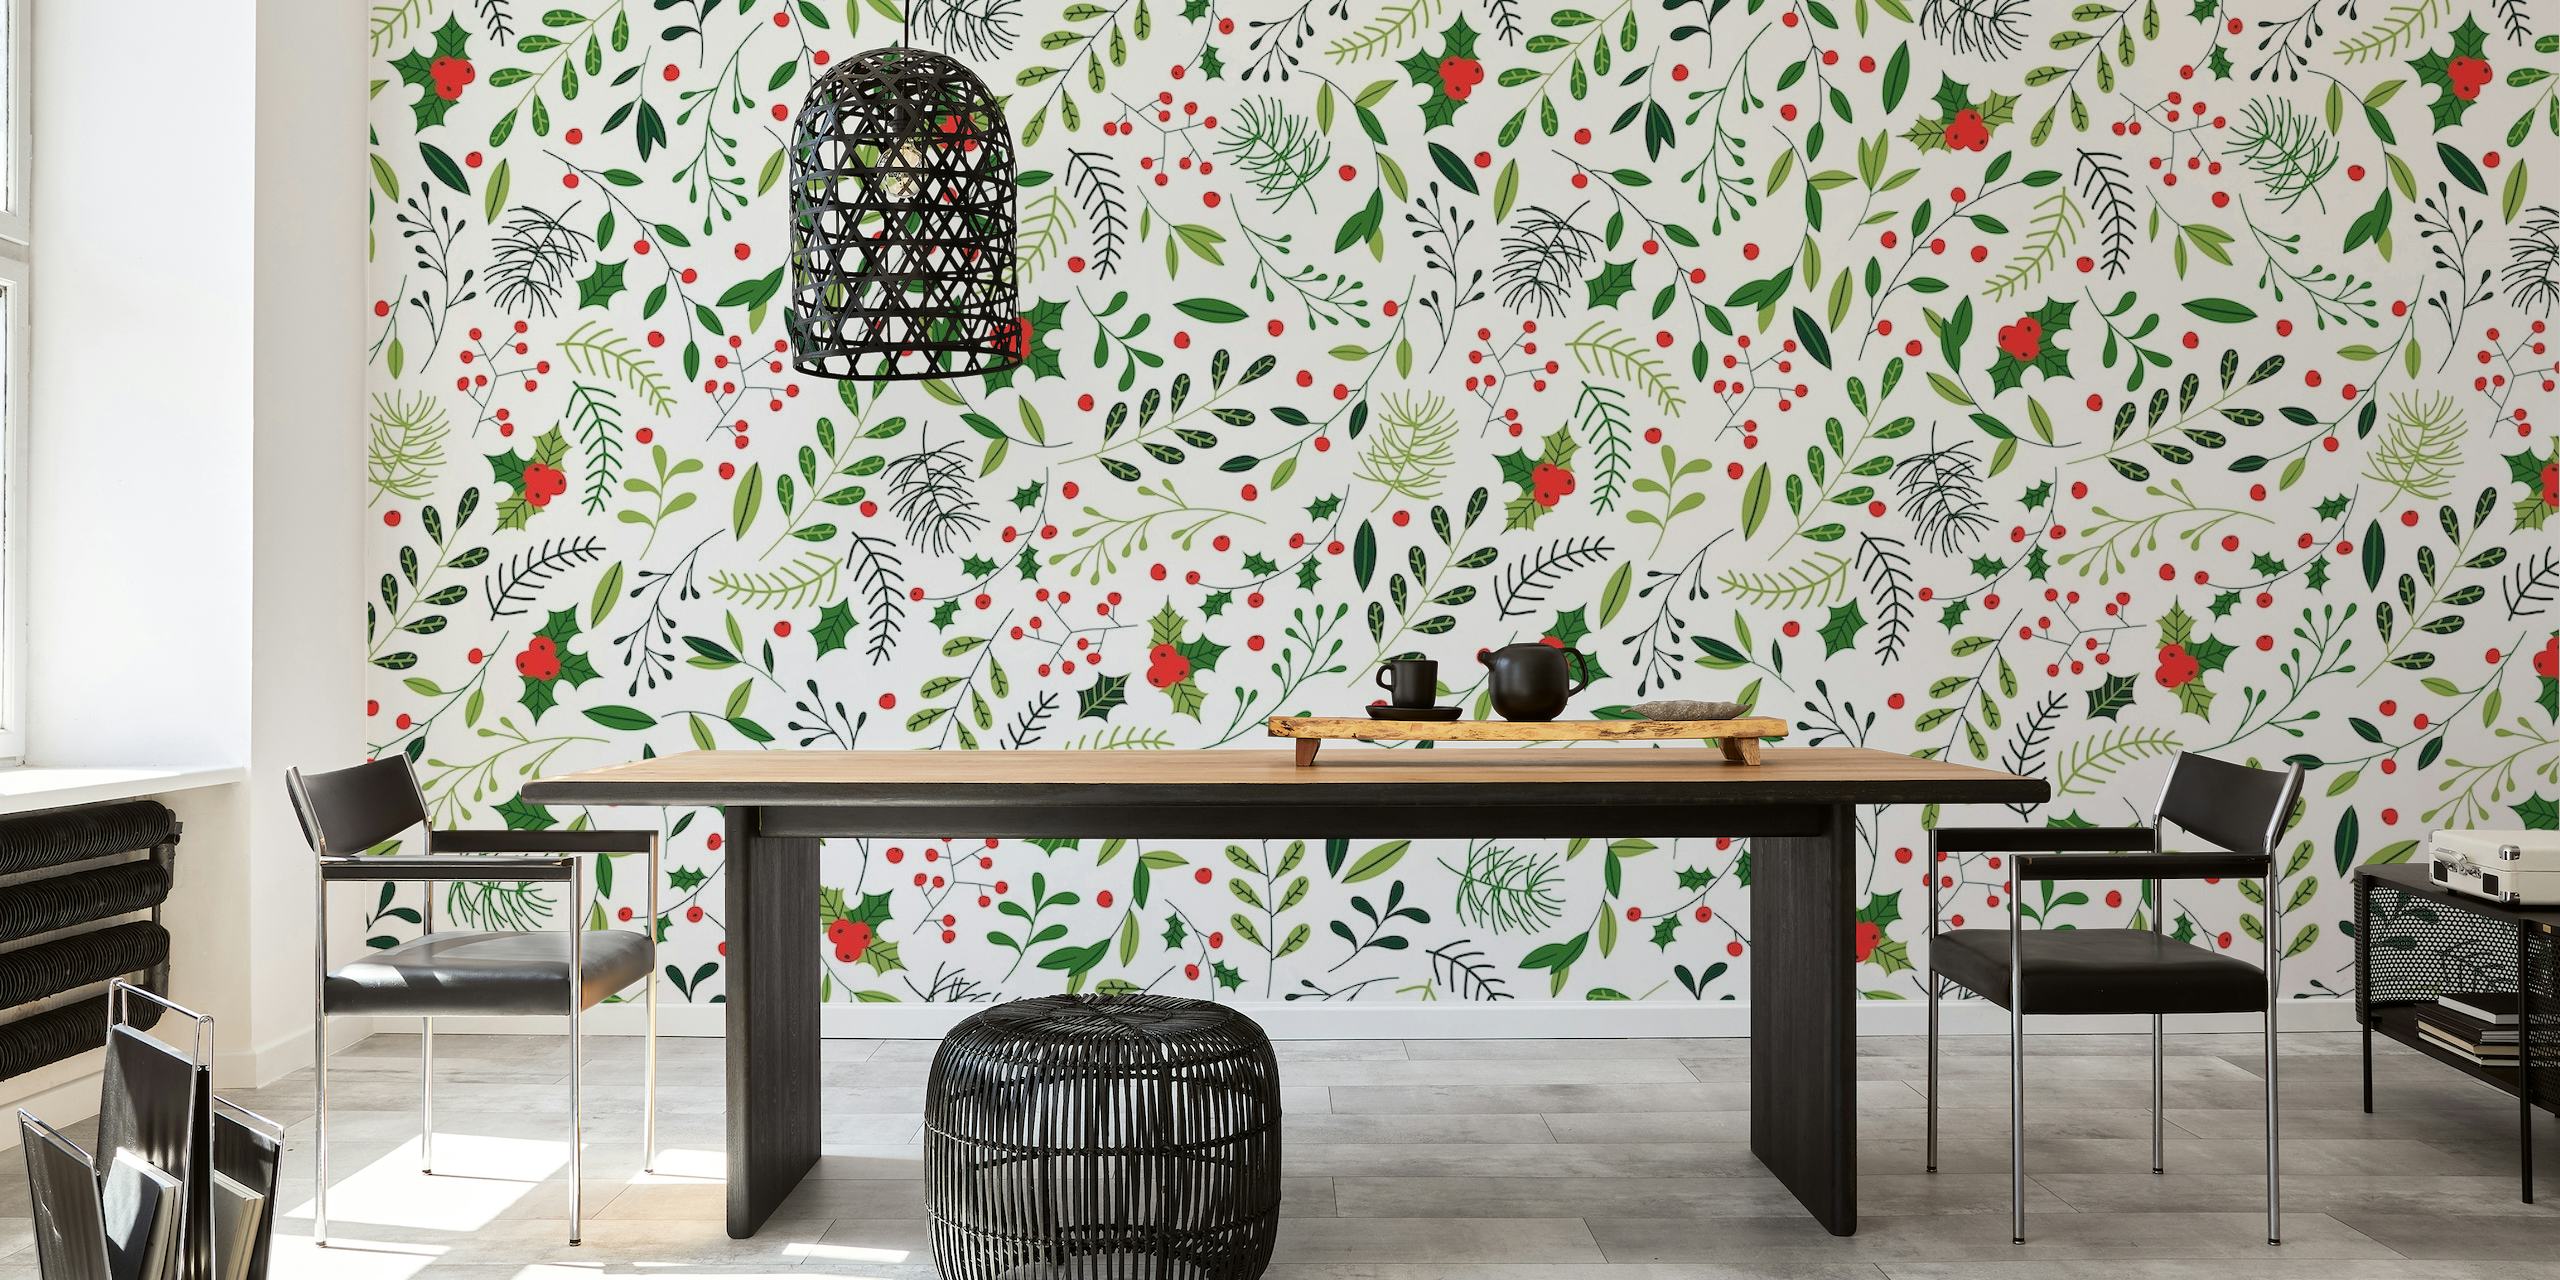 Flowprogress botanical wall mural with greenery and red berries